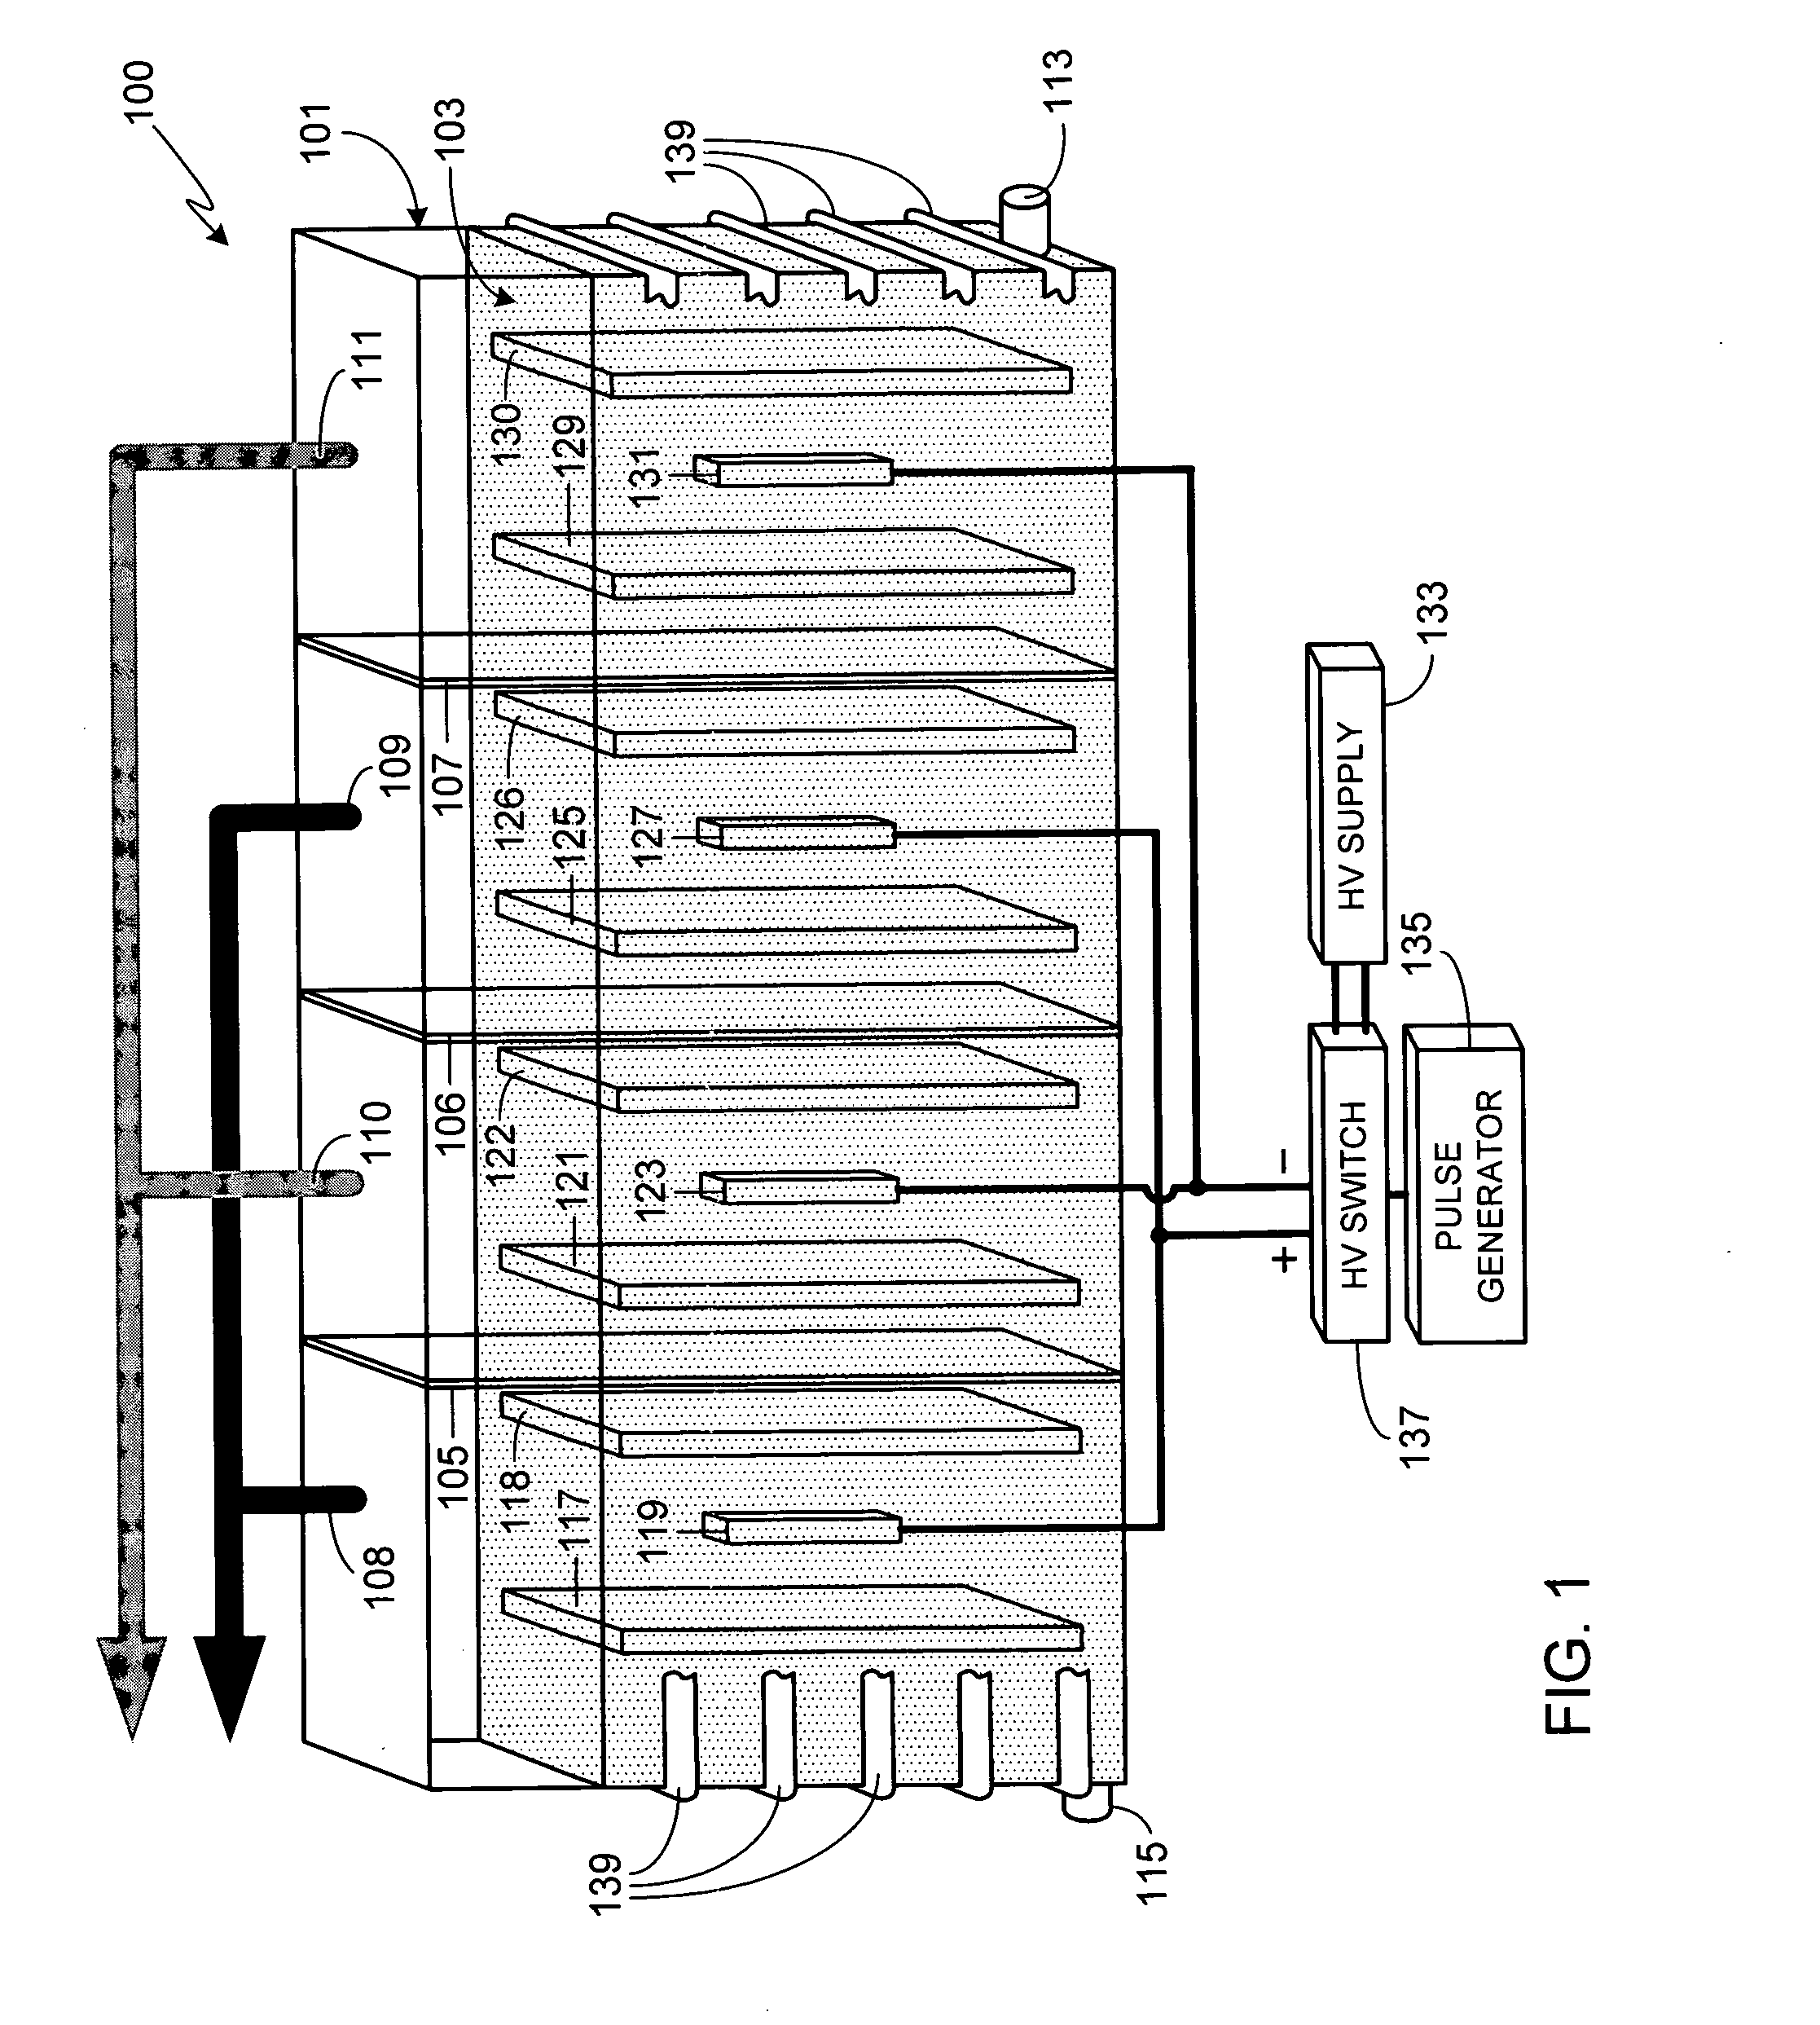 Multi-cell single voltage electrolysis apparatus and method of using same